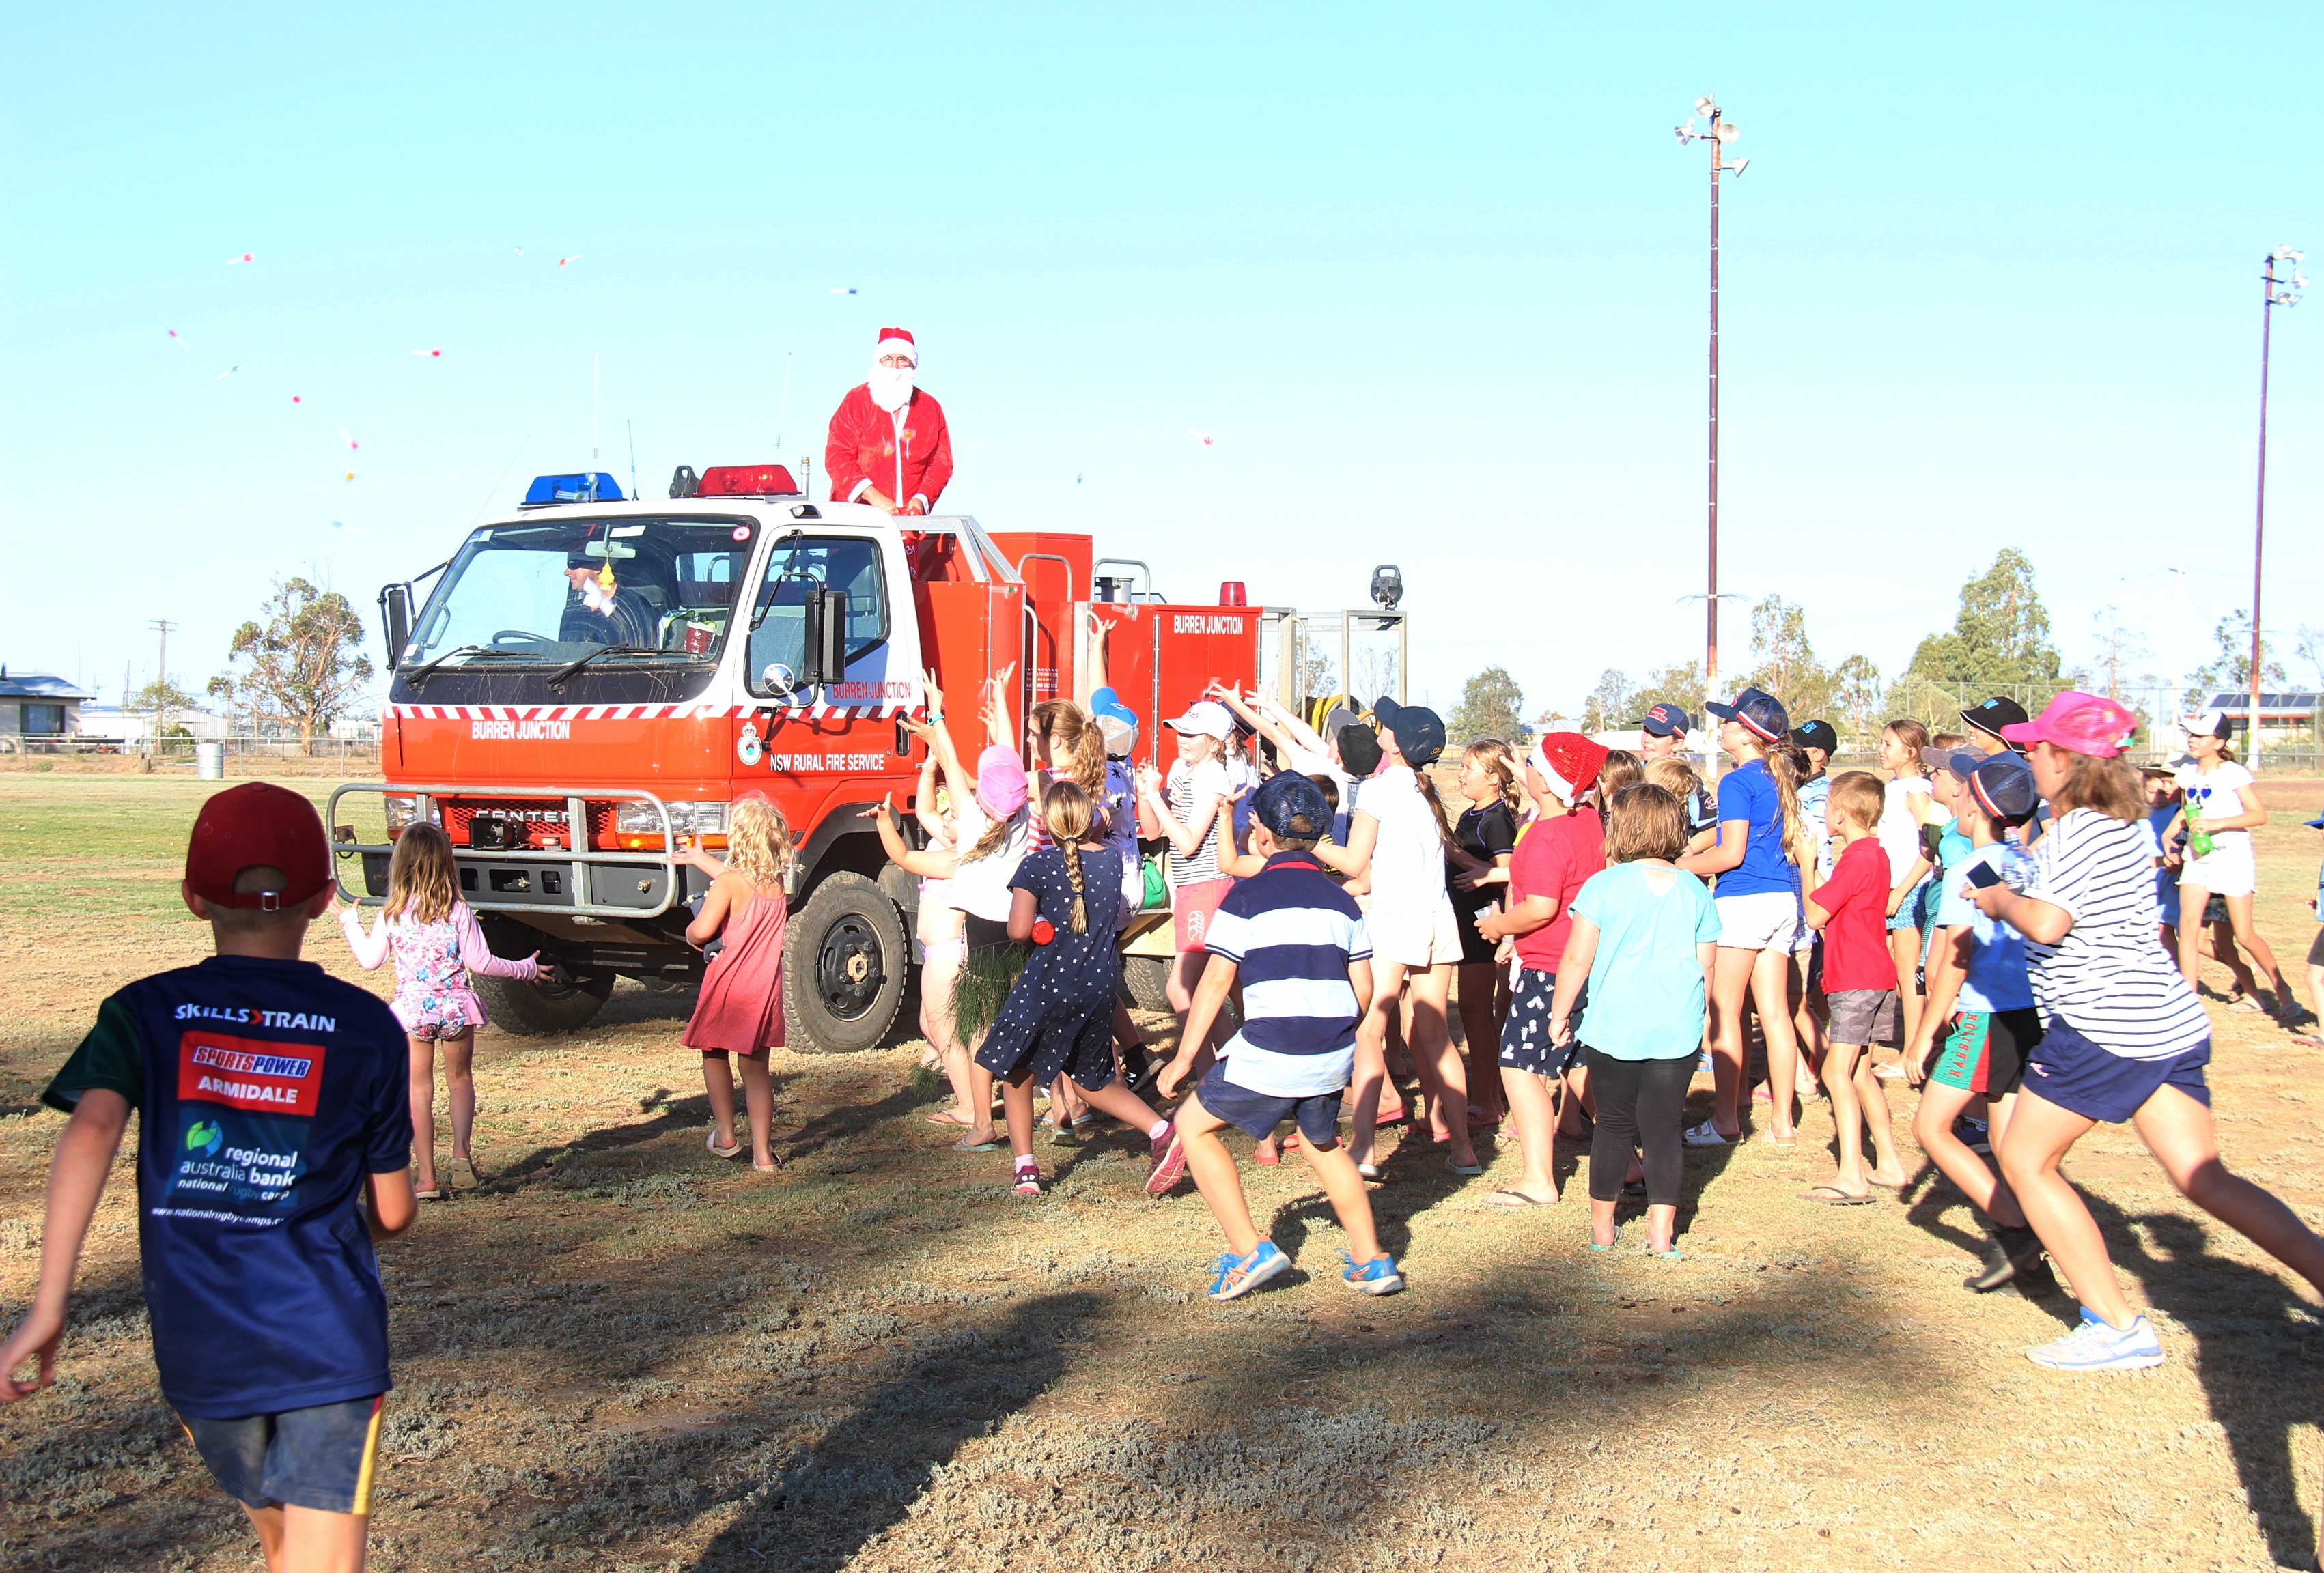 A highlight of the day was Santa Claus arriving in Burren Junction. The big man in red arrived on board the RFS fire truck driven by RFS member Christian Powell. Santa distributed lollies to the children with the help of Senior Constable Paul Matts.